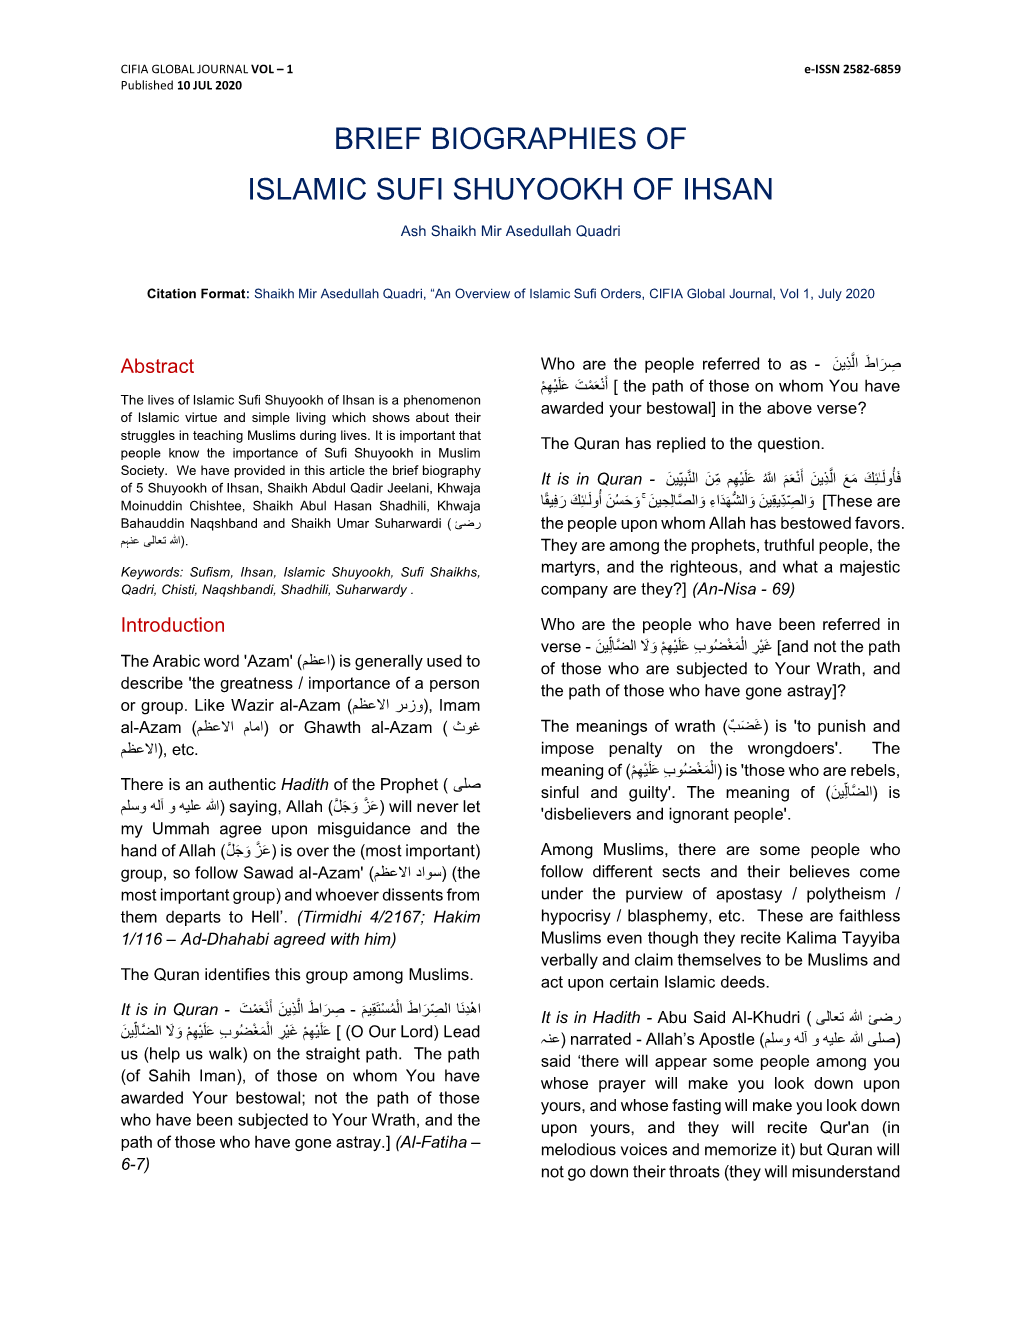 Brief Biographies of Islamic Sufi Shuyookh of Ihsan